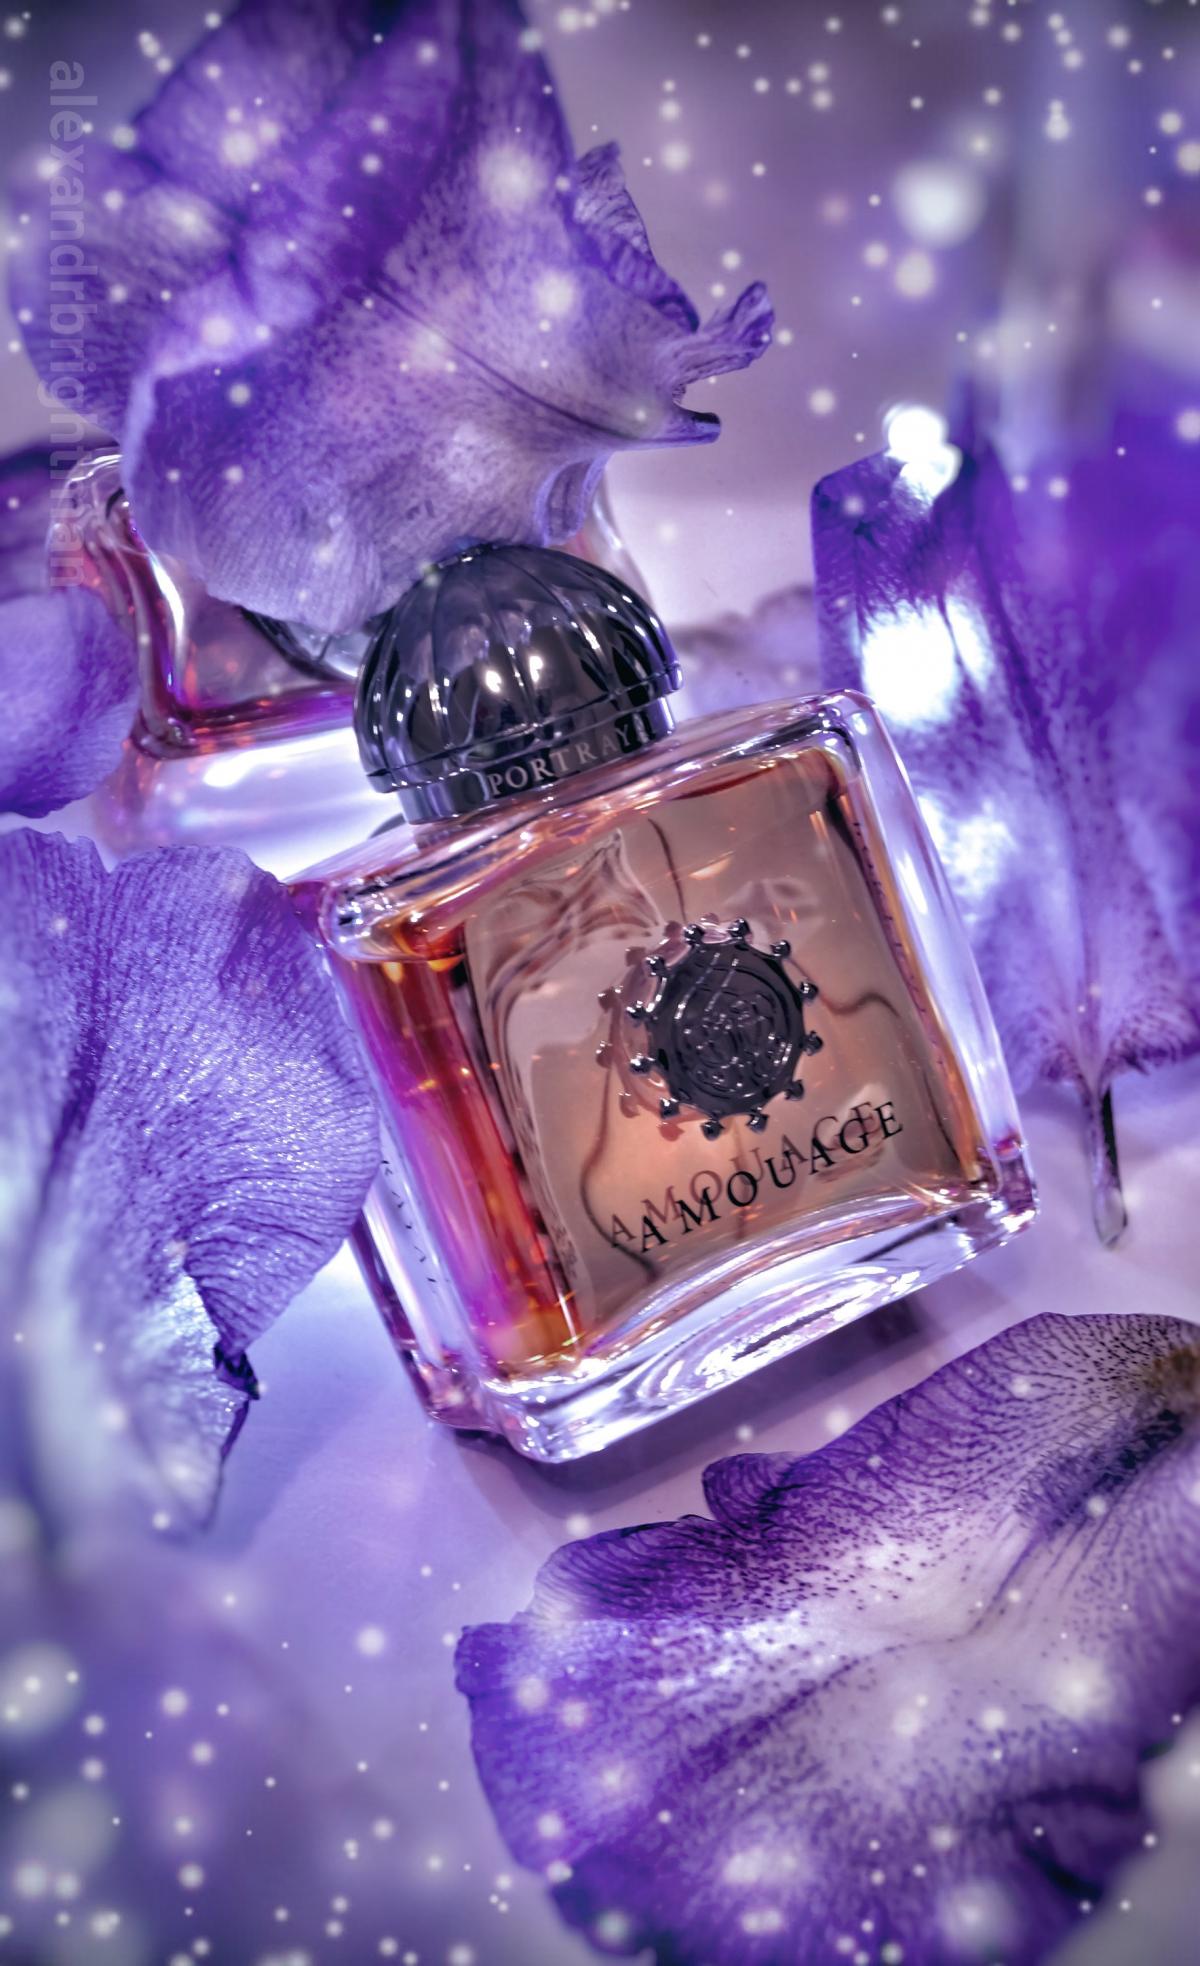 Portrayal Woman Amouage perfume - a new fragrance for ...